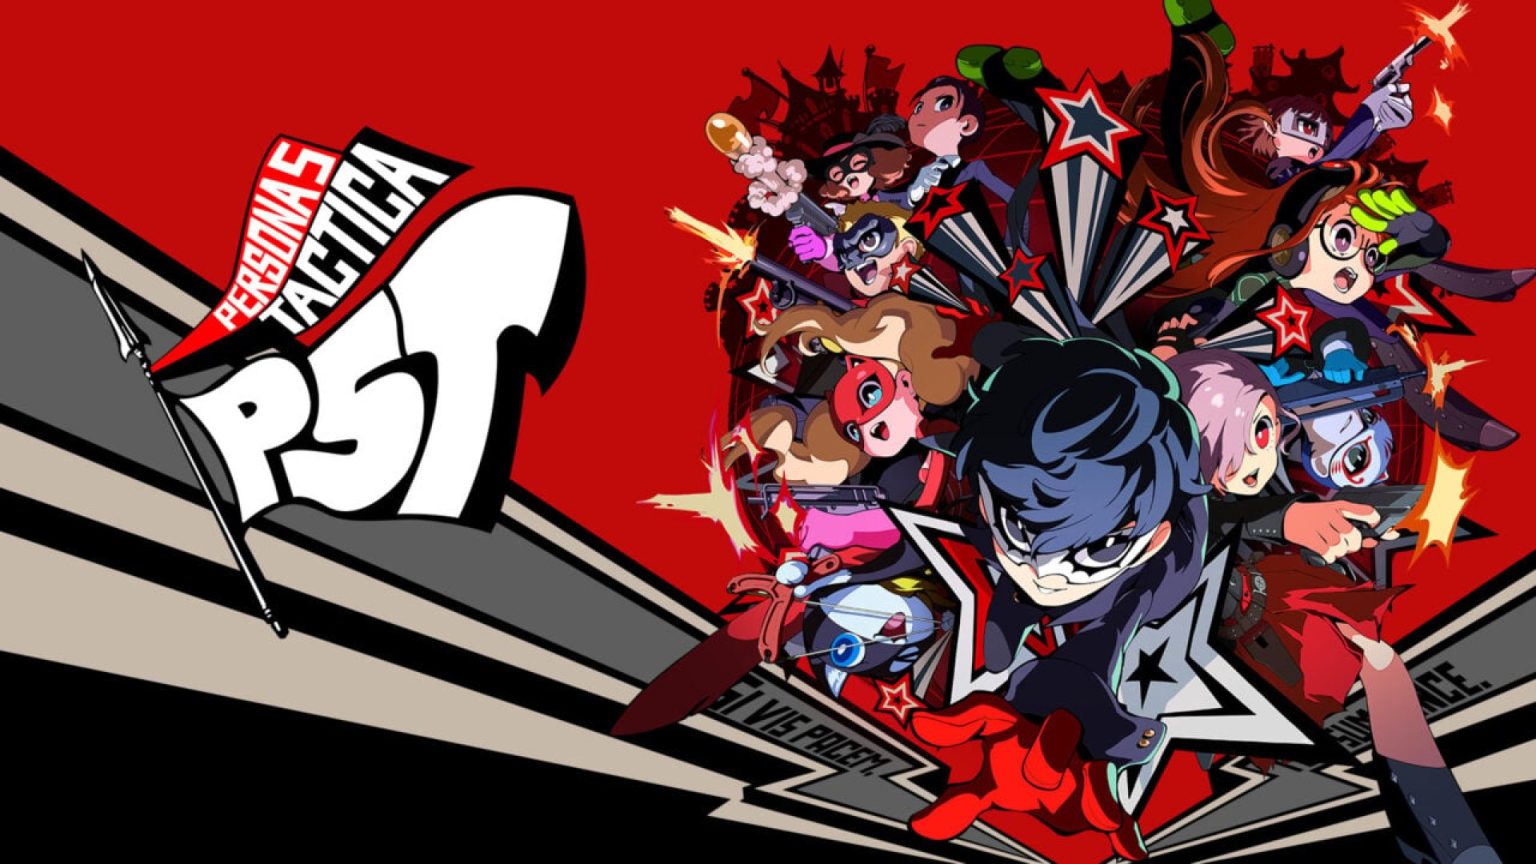 Persona 5 Tactica developers have released a new trailer showing three characters: Joker, Morgana, and Erin.